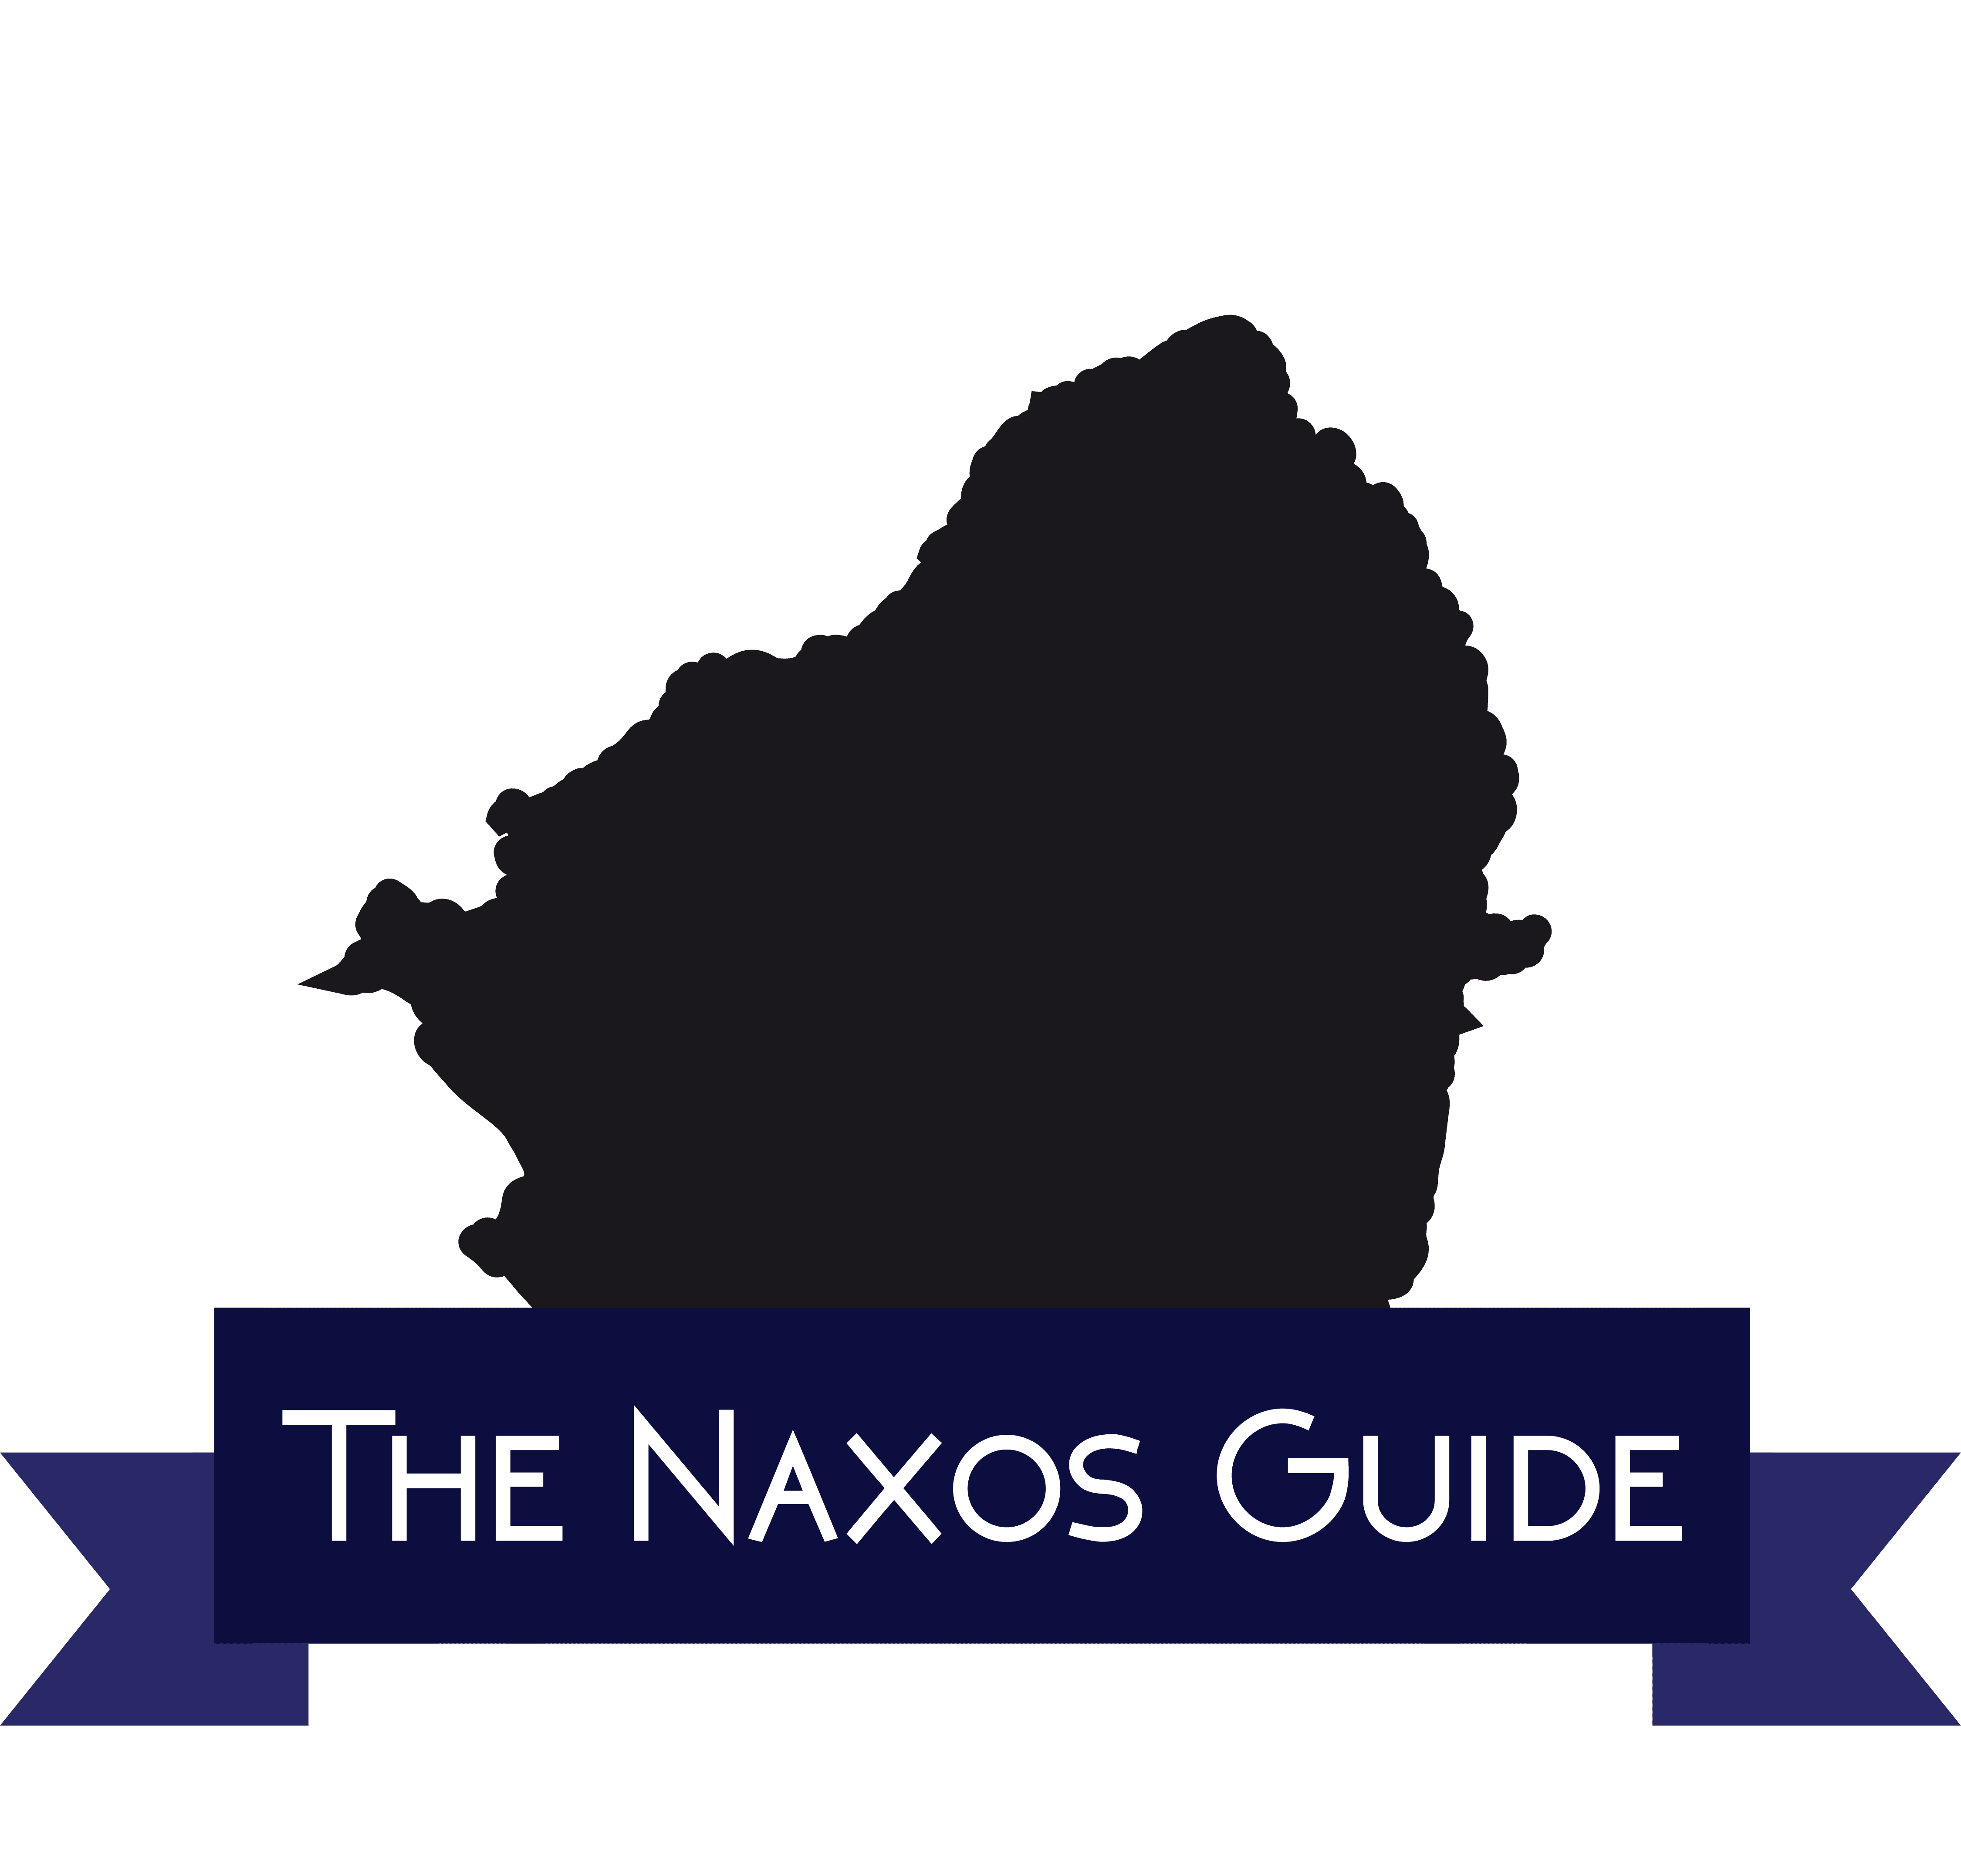 The Naxos Guide